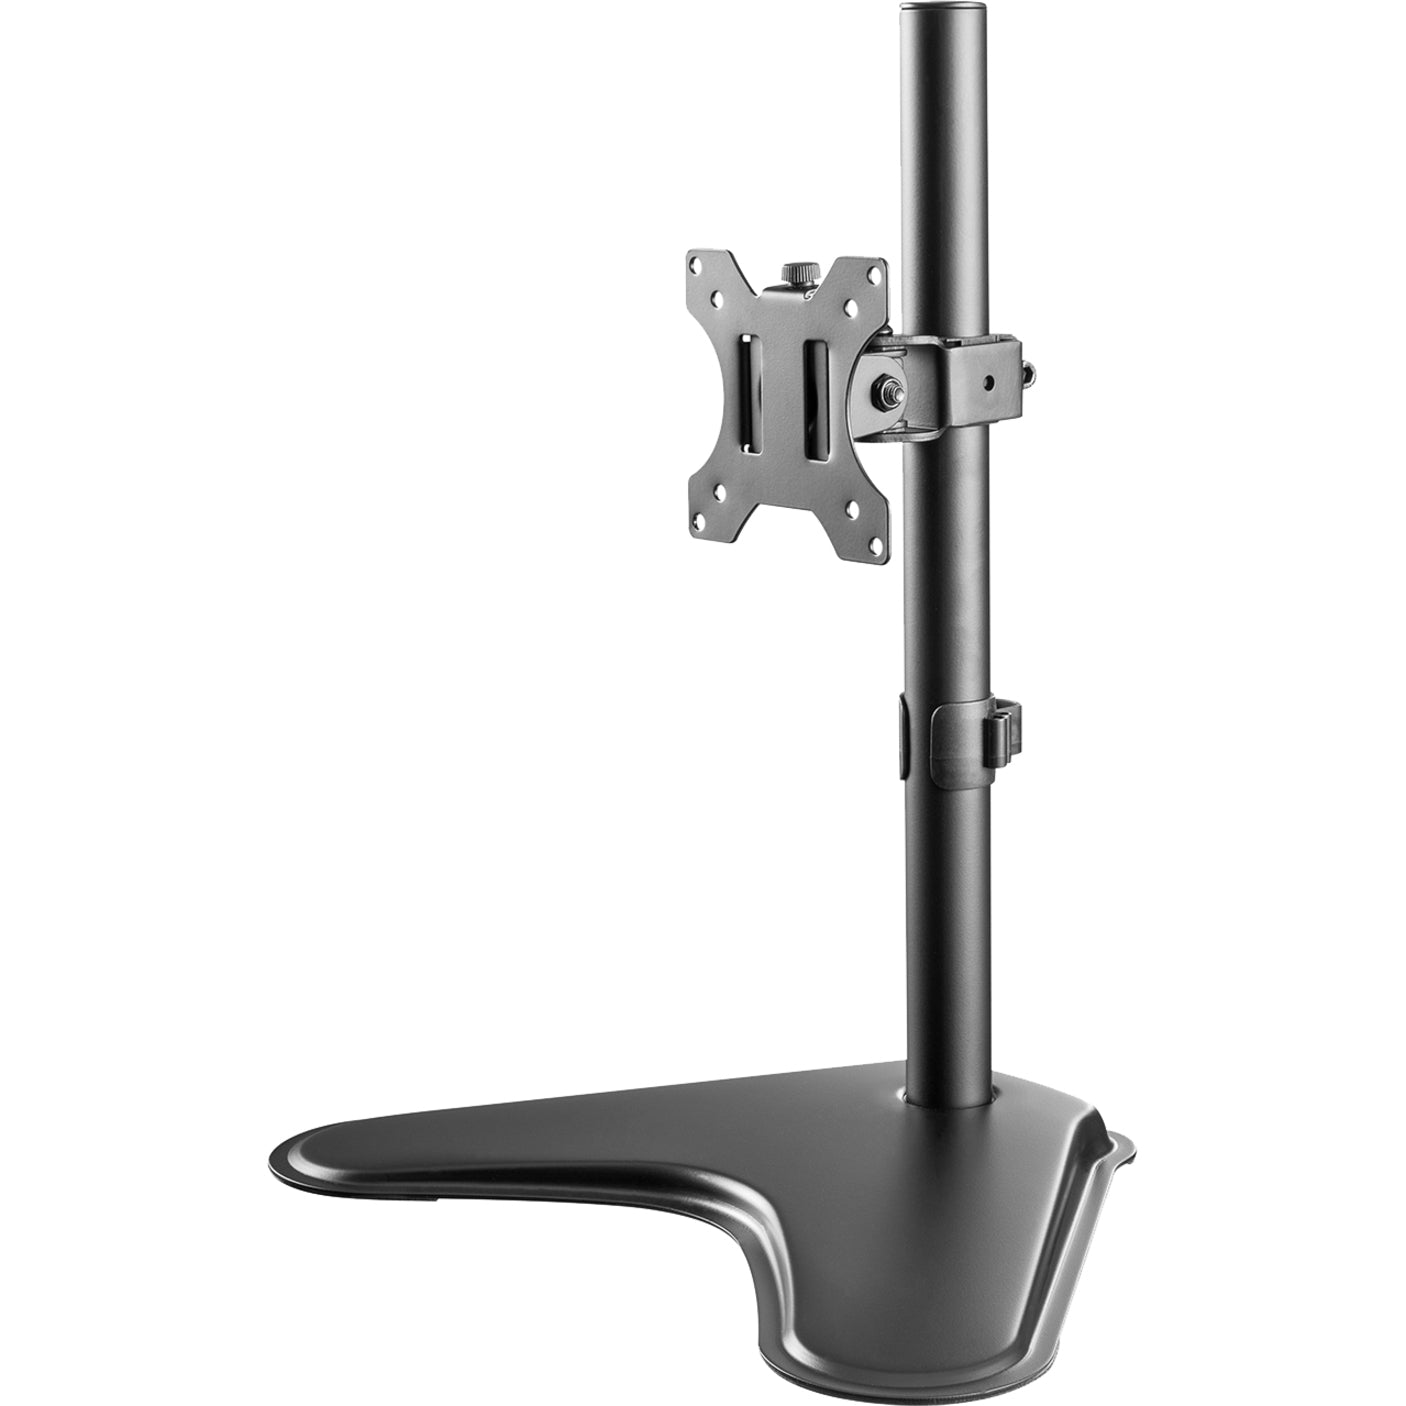 V7 DS1FSS Monitor Stand, Rotating, Swiveling, Tilting, 17.64 lb Load Capacity, 32" Screen Size Supported